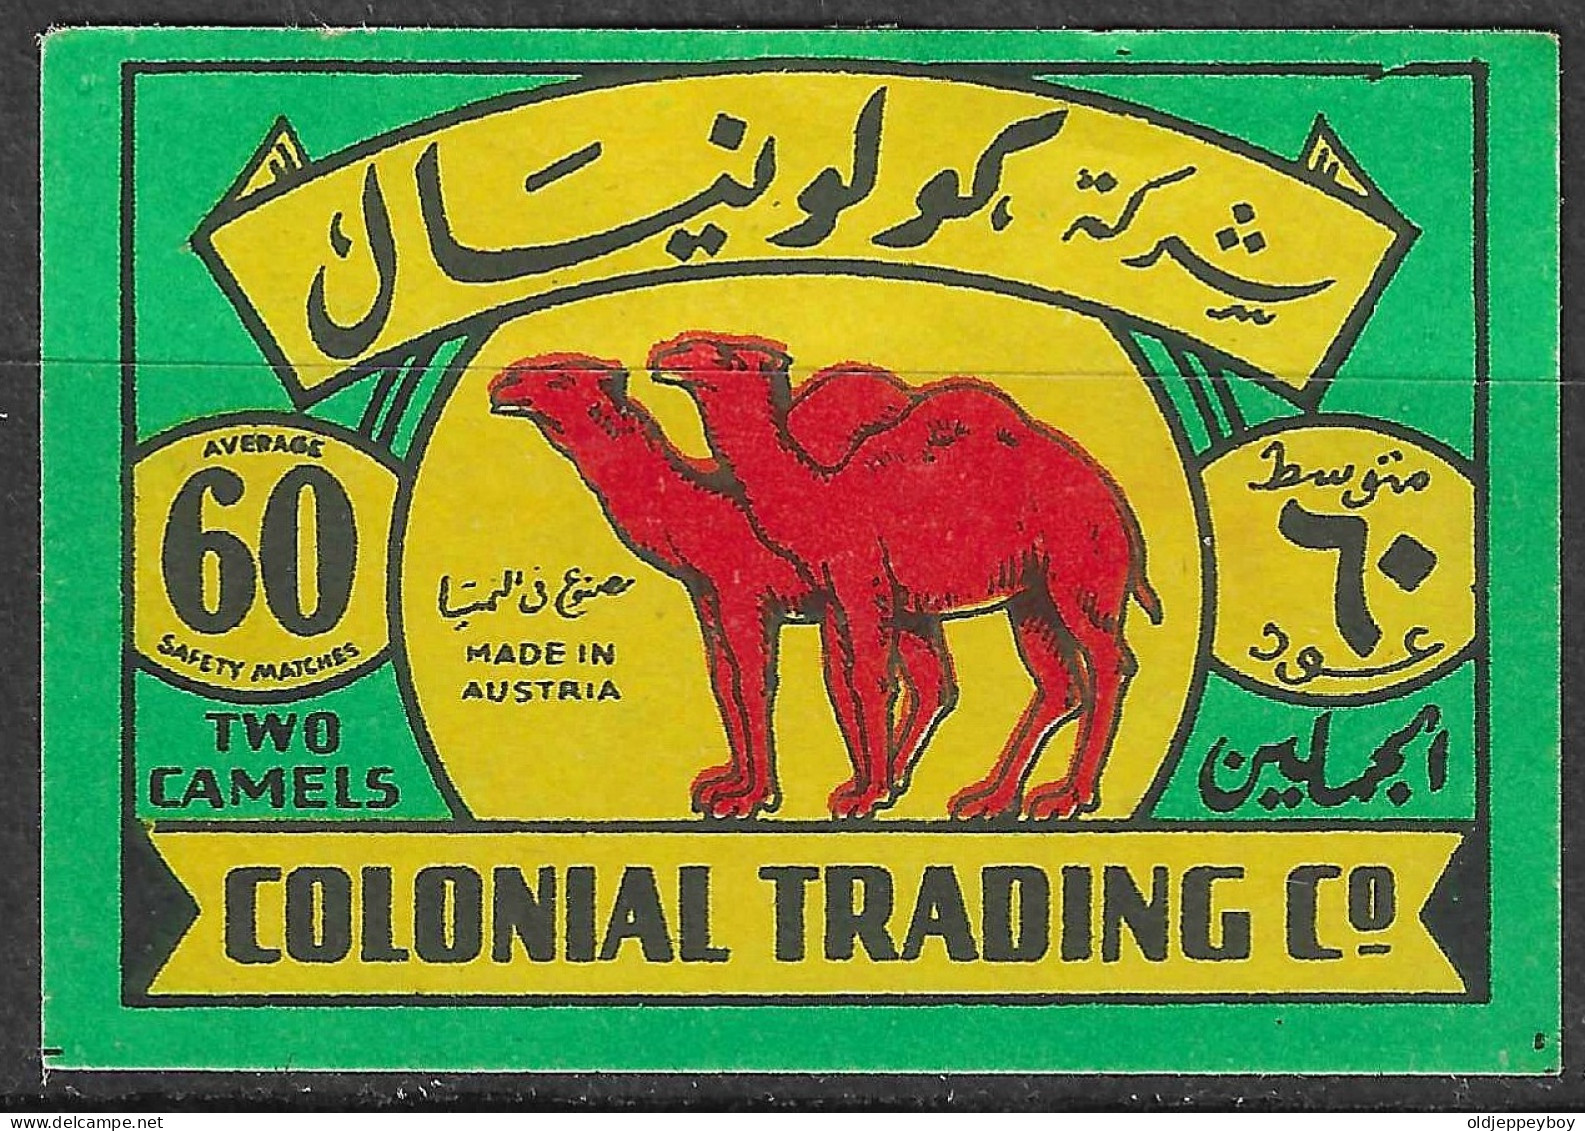  Phillumeny MATCHBOX LABEL Made In Poland, 1950’s/1960’s TWO CAMELS  3.5 X 5 Cm - Matchbox Labels